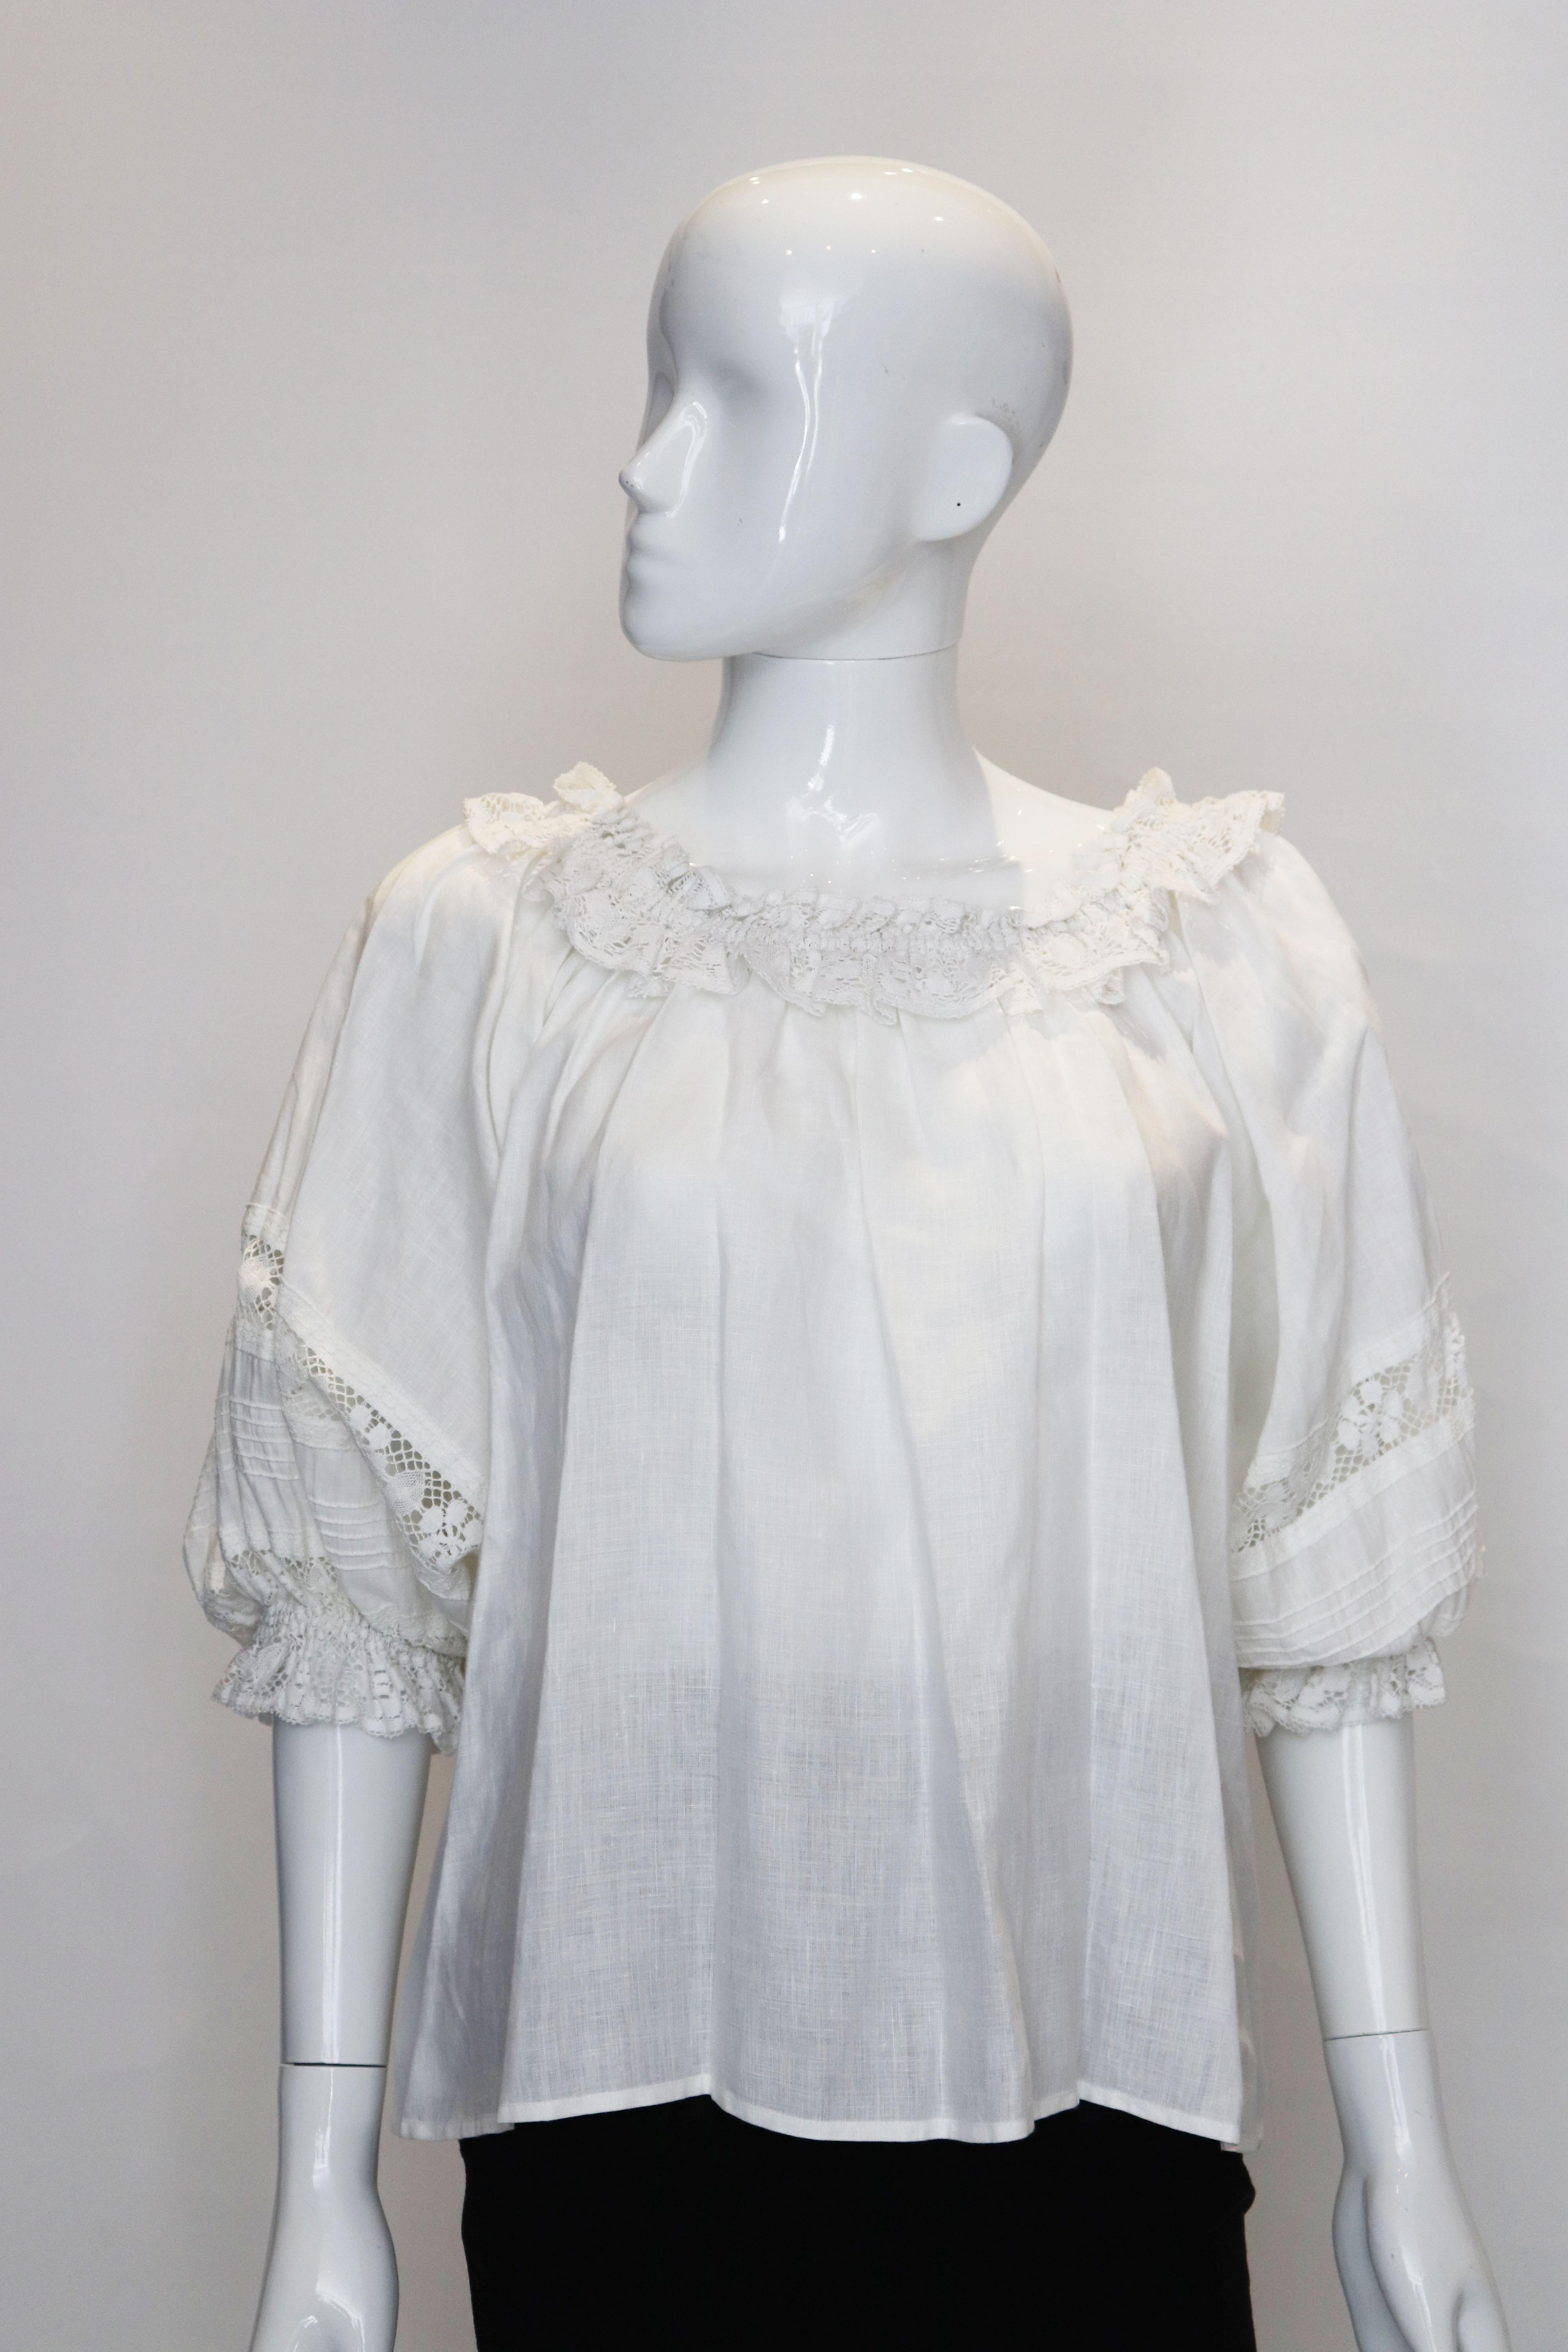 A vintage John Radaelli linen top. The top is off the shoulders with a lace trim and elbow length sleaves with lace detail.